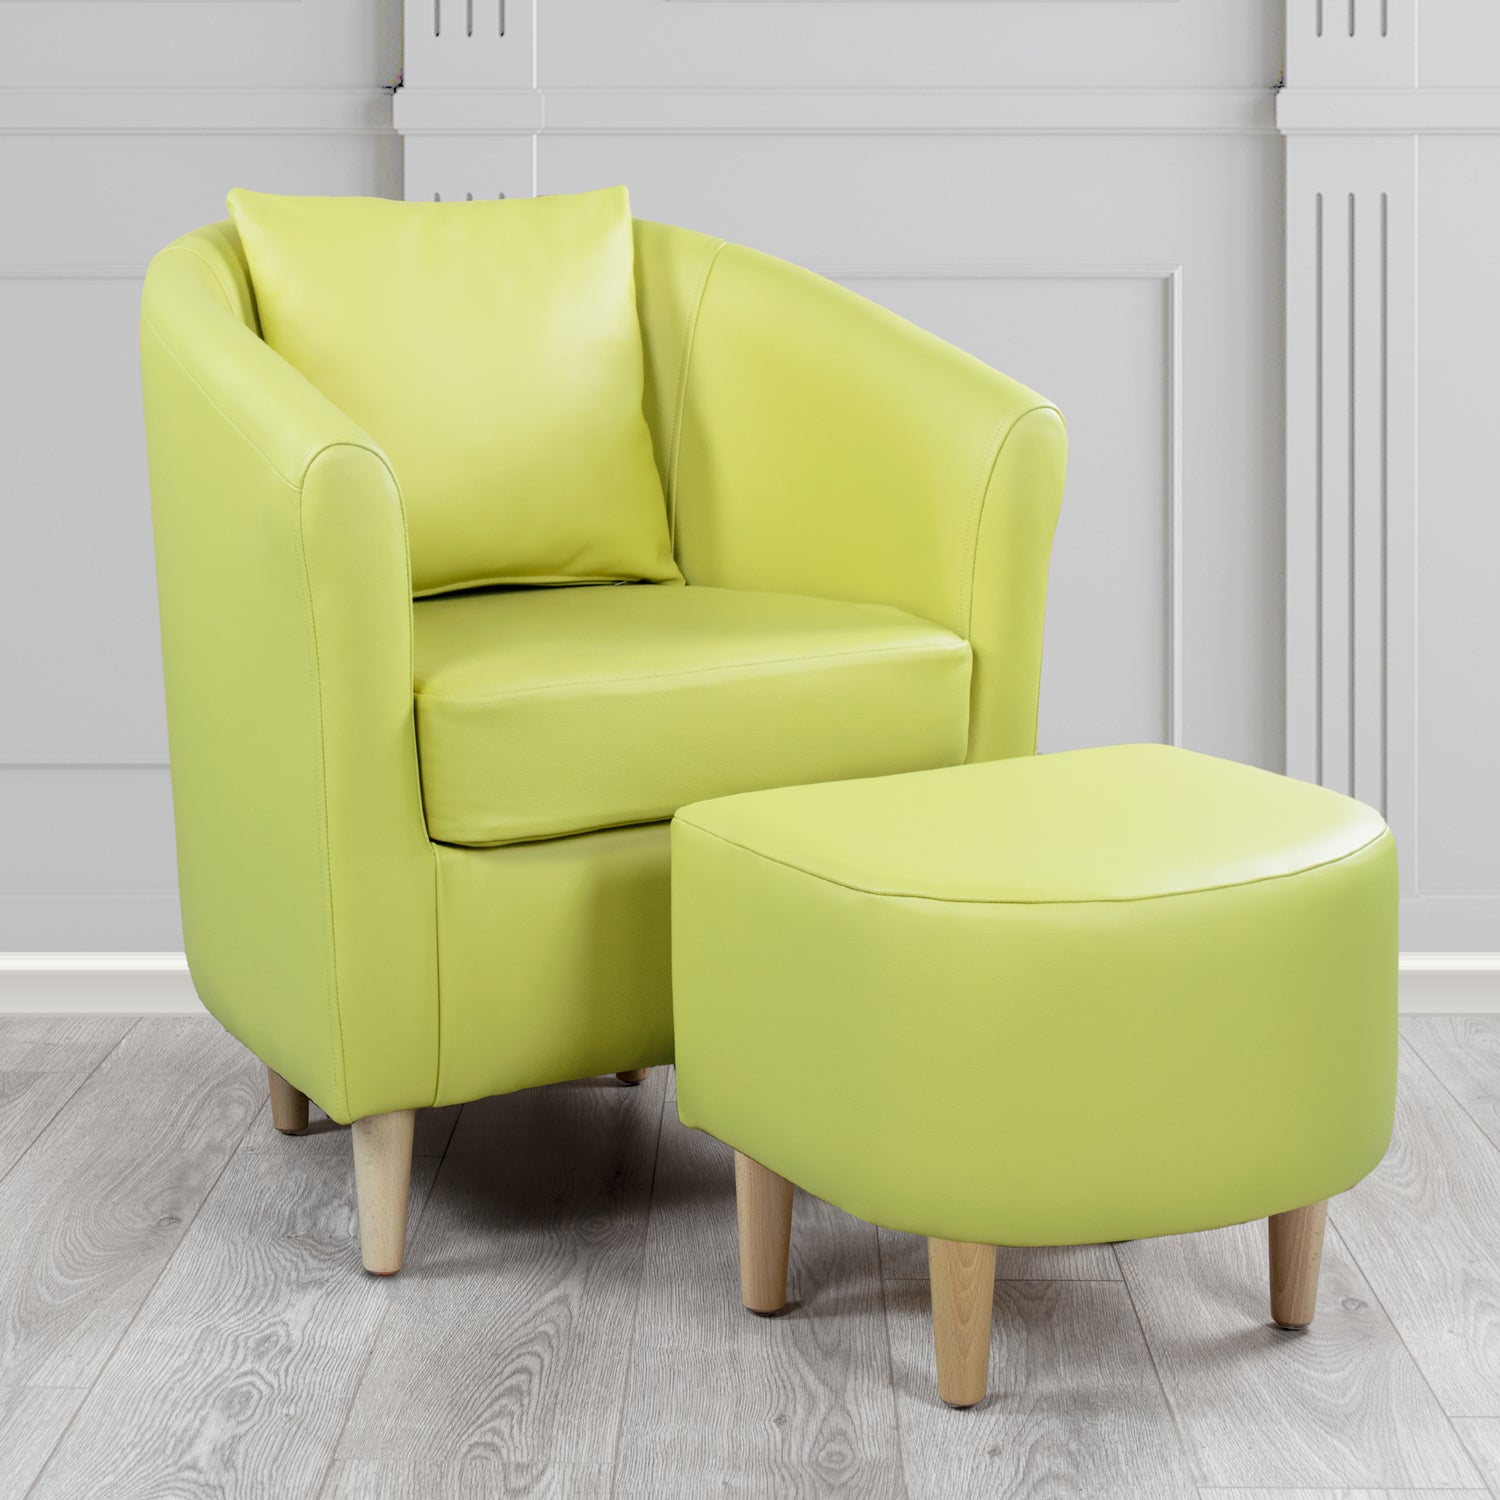 St Tropez Shelly Chartreuse Crib 5 Genuine Leather Tub Chair & Footstool Set With Scatter Cushion (6619467644970)